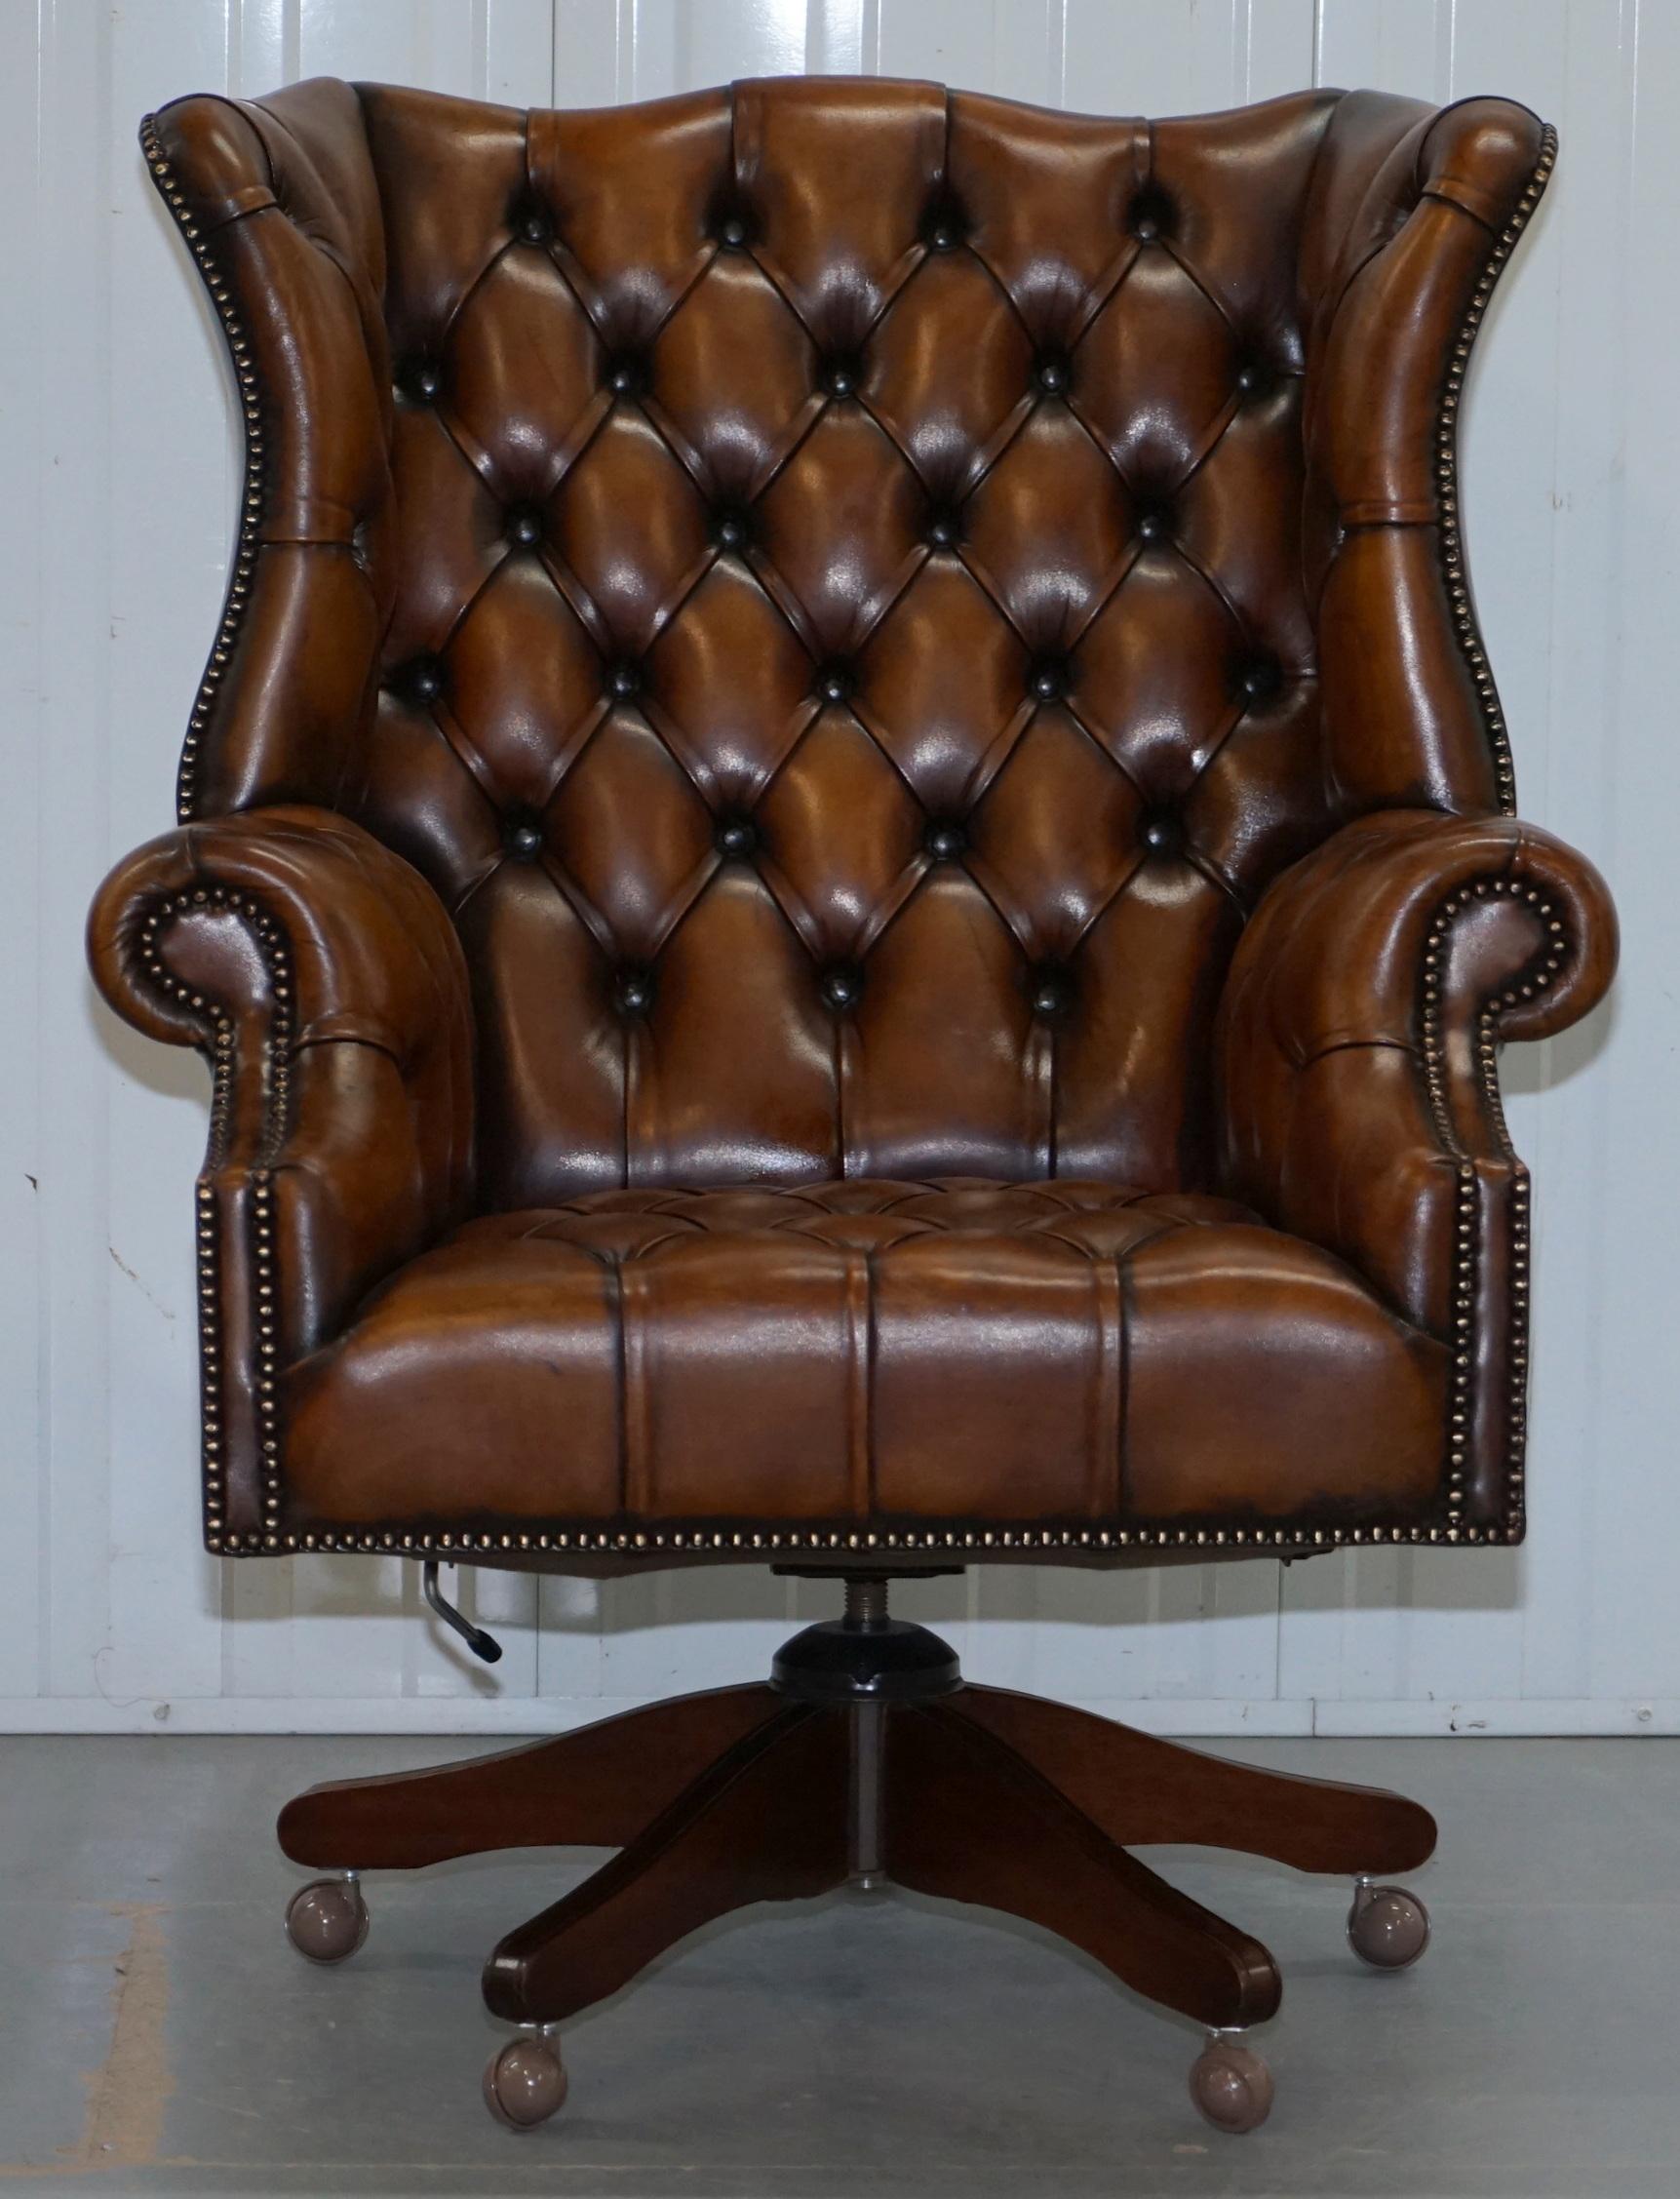 We are delighted to offer for sale this stunning very rare original circa 1940s hand dyed fully restored cigar brown leather Chesterfield fully buttoned wingback directors captains chair

This is the bosses chair, the executive director, there are